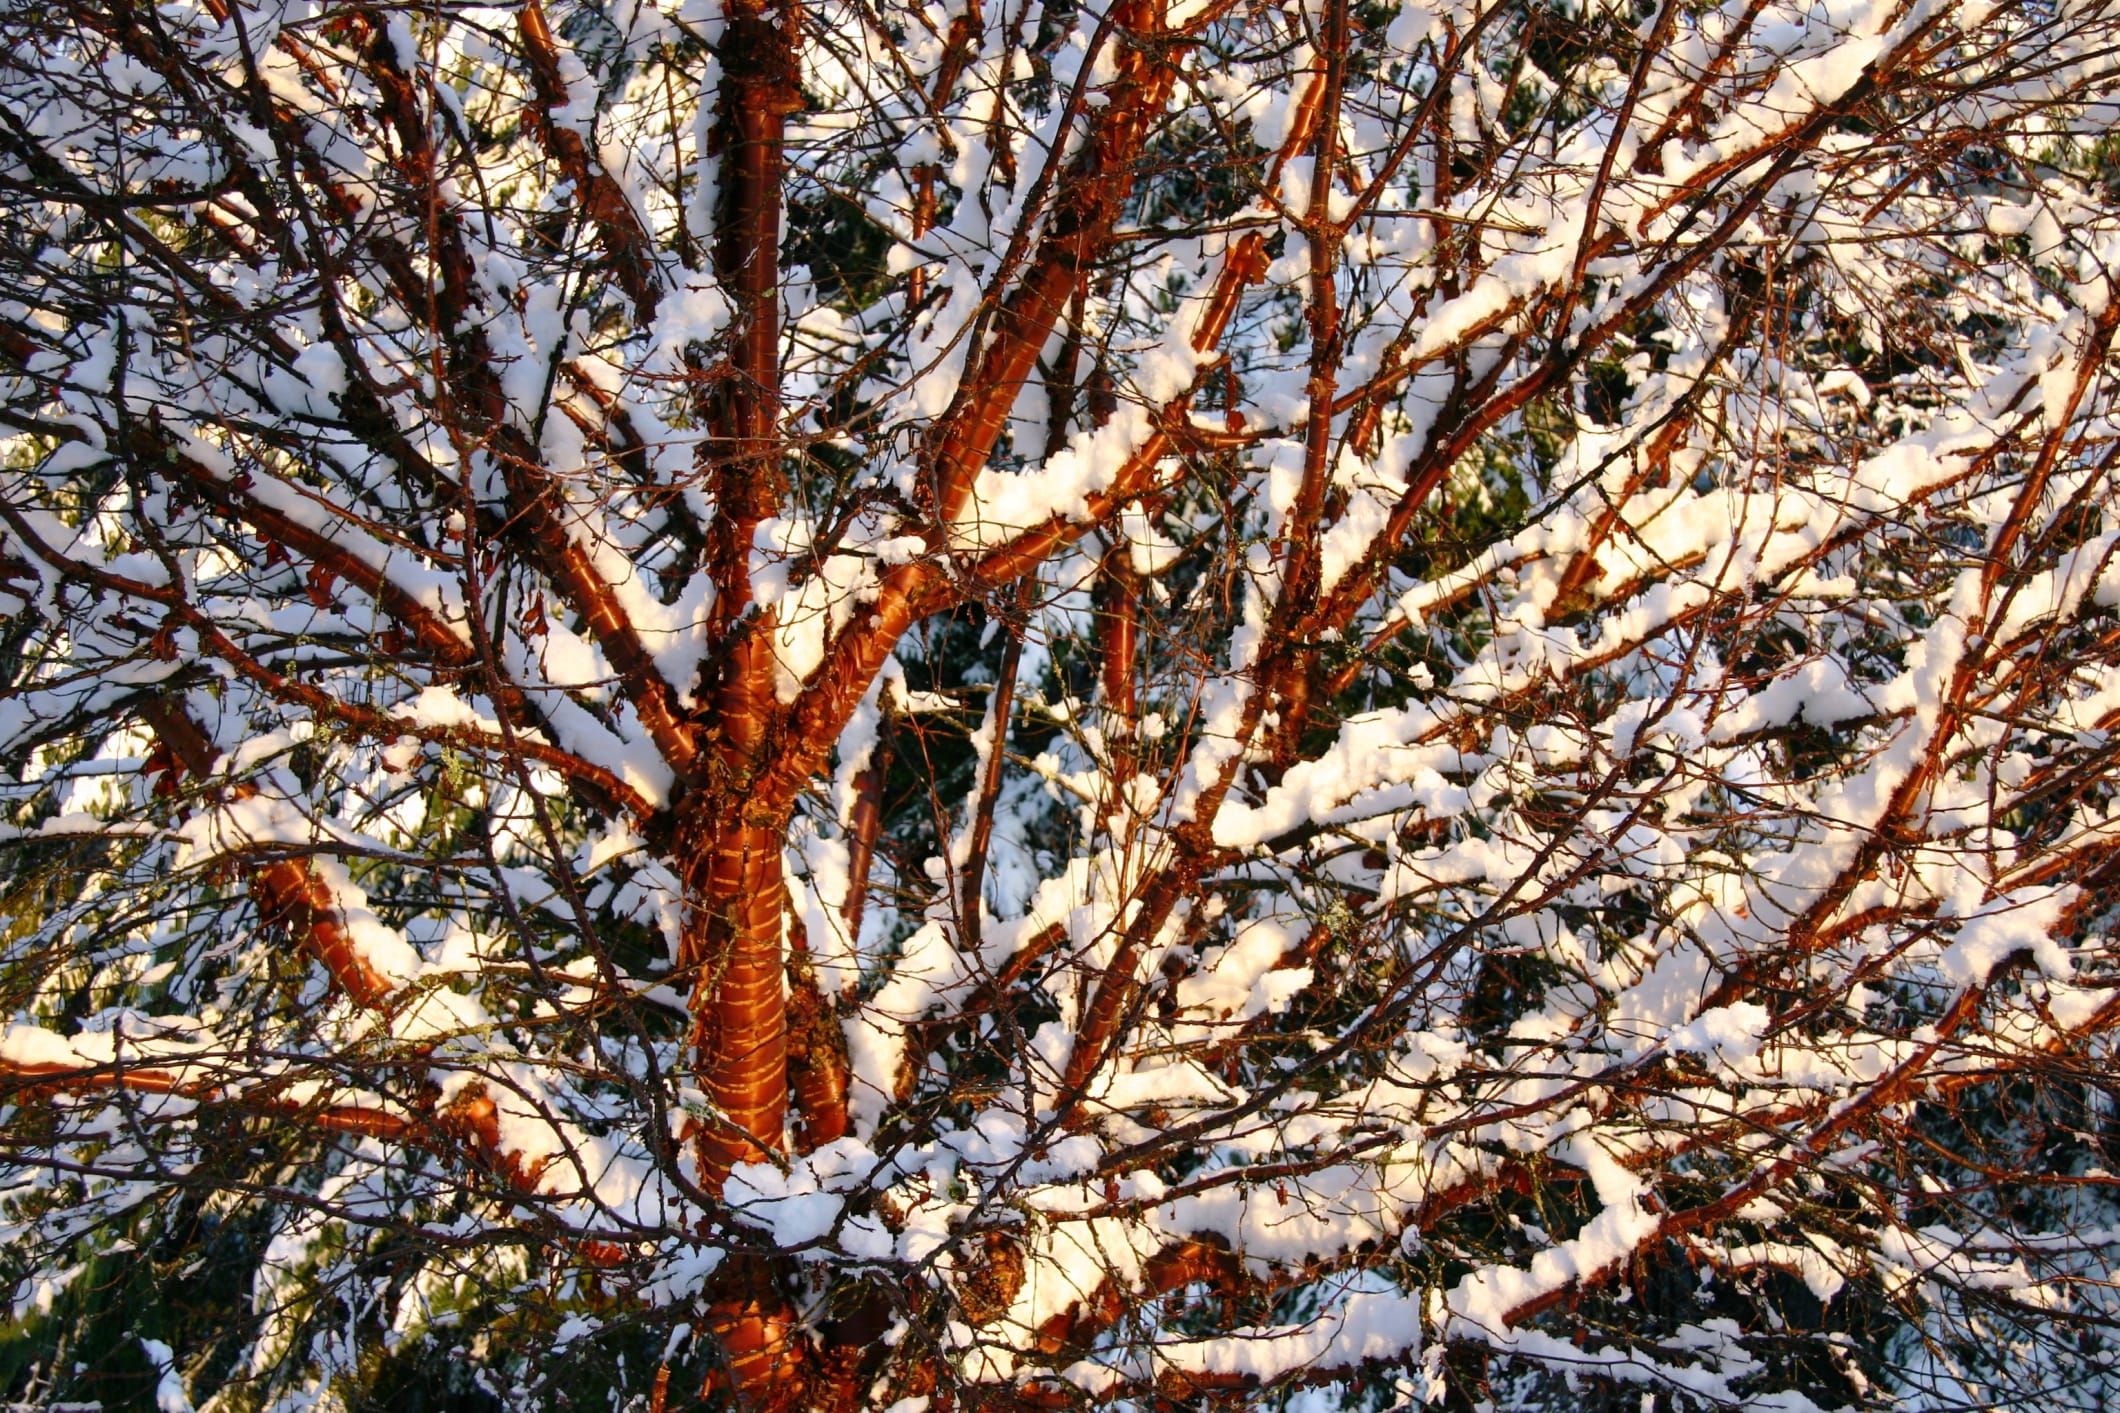 Robb Rosser
Snowfall creates a magical moment in the branches of the Tibetan Cherry tree.